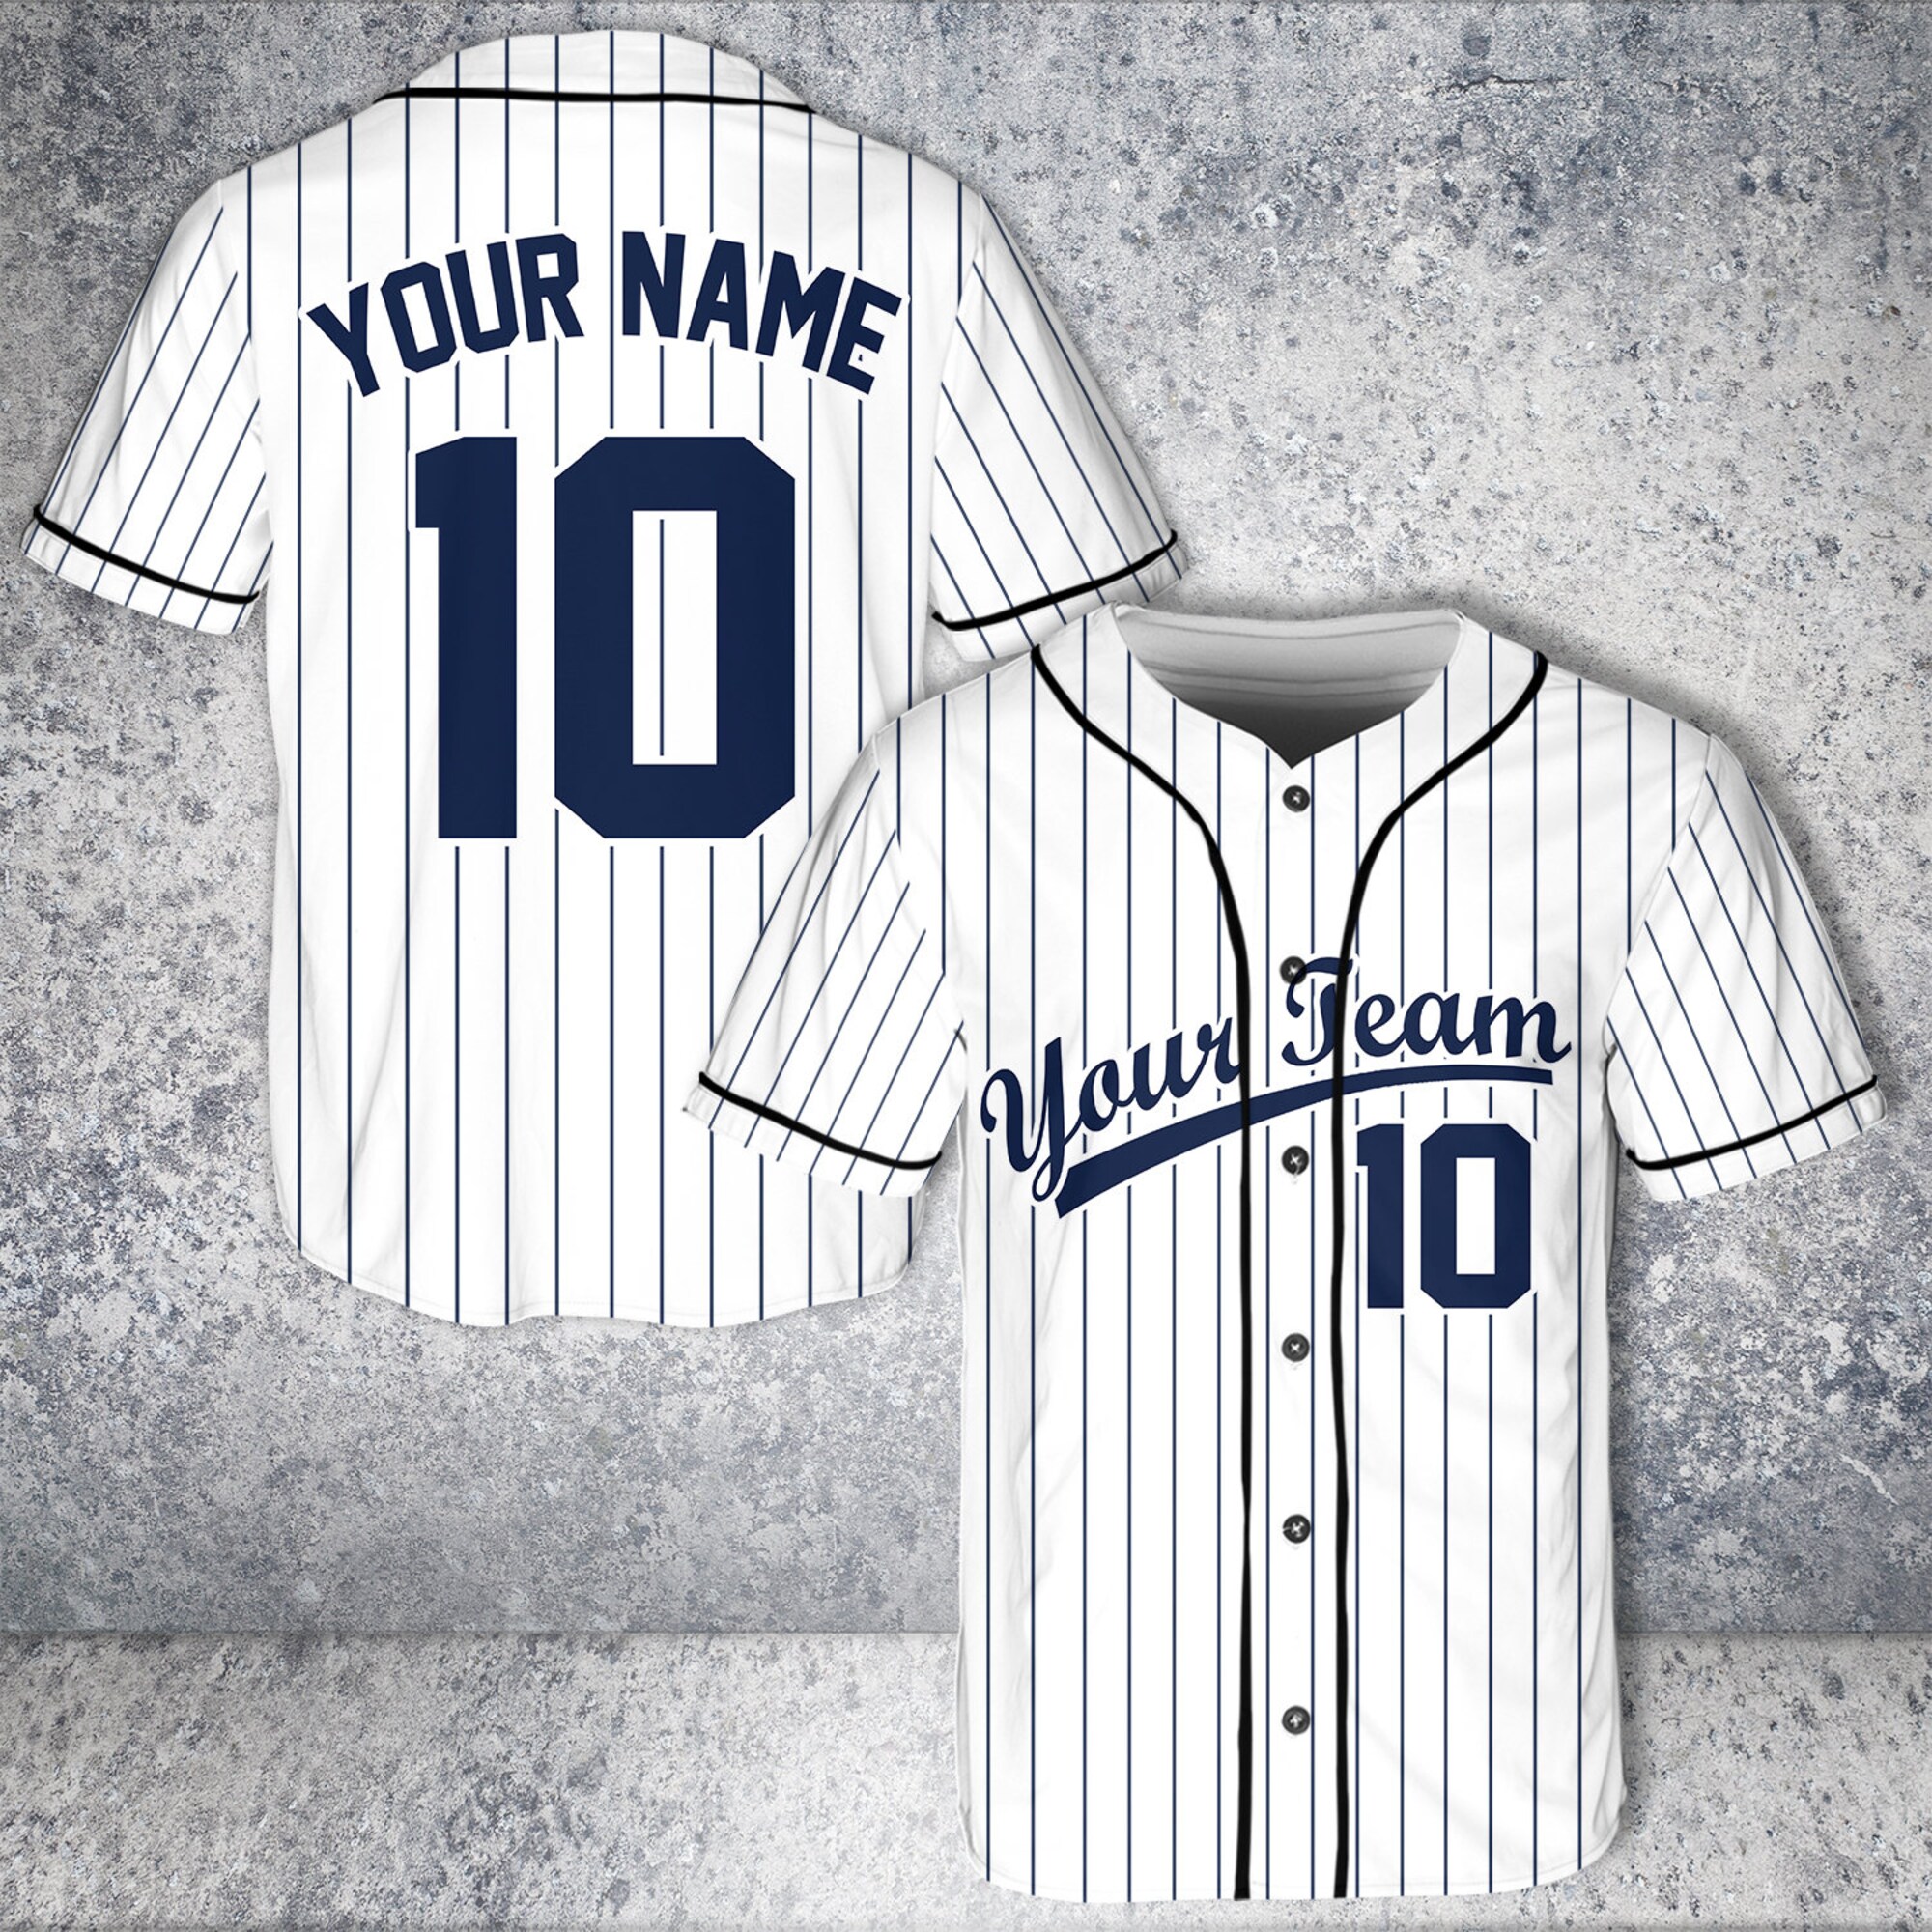 Discover Personalized Name Customized Designs Baseball Jersey For Baseball Fans